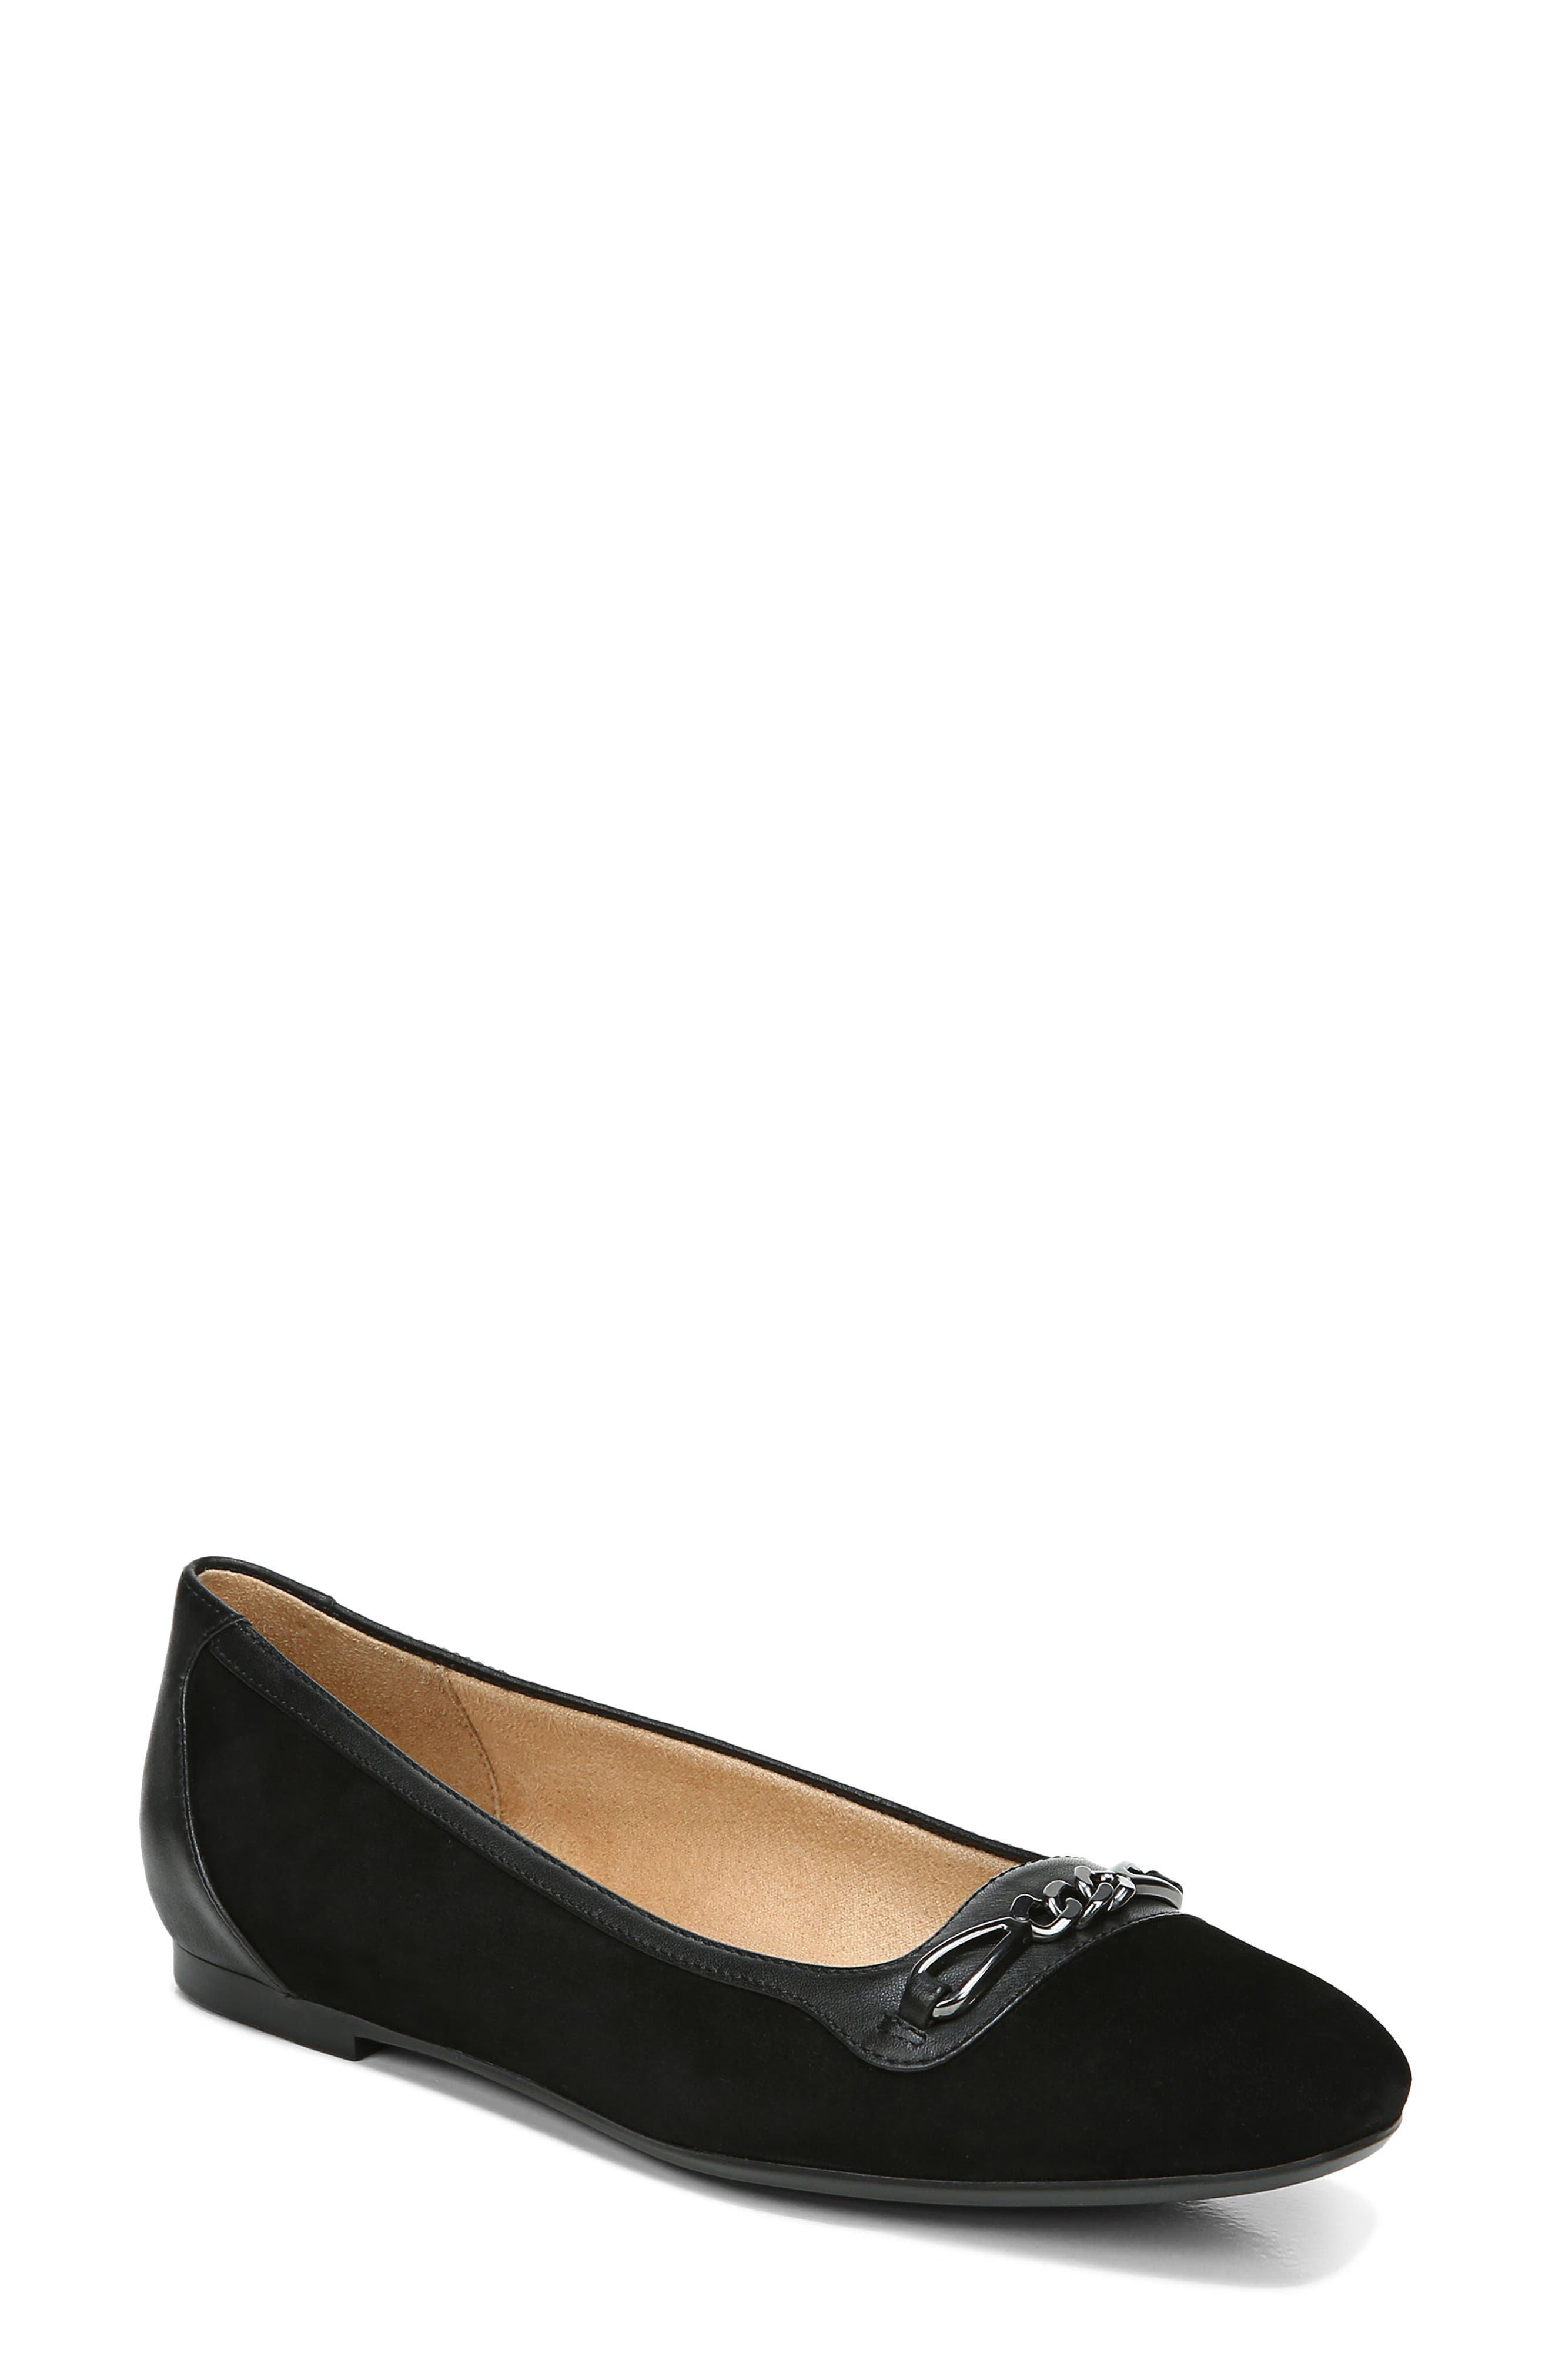 naturalizer flats with arch support